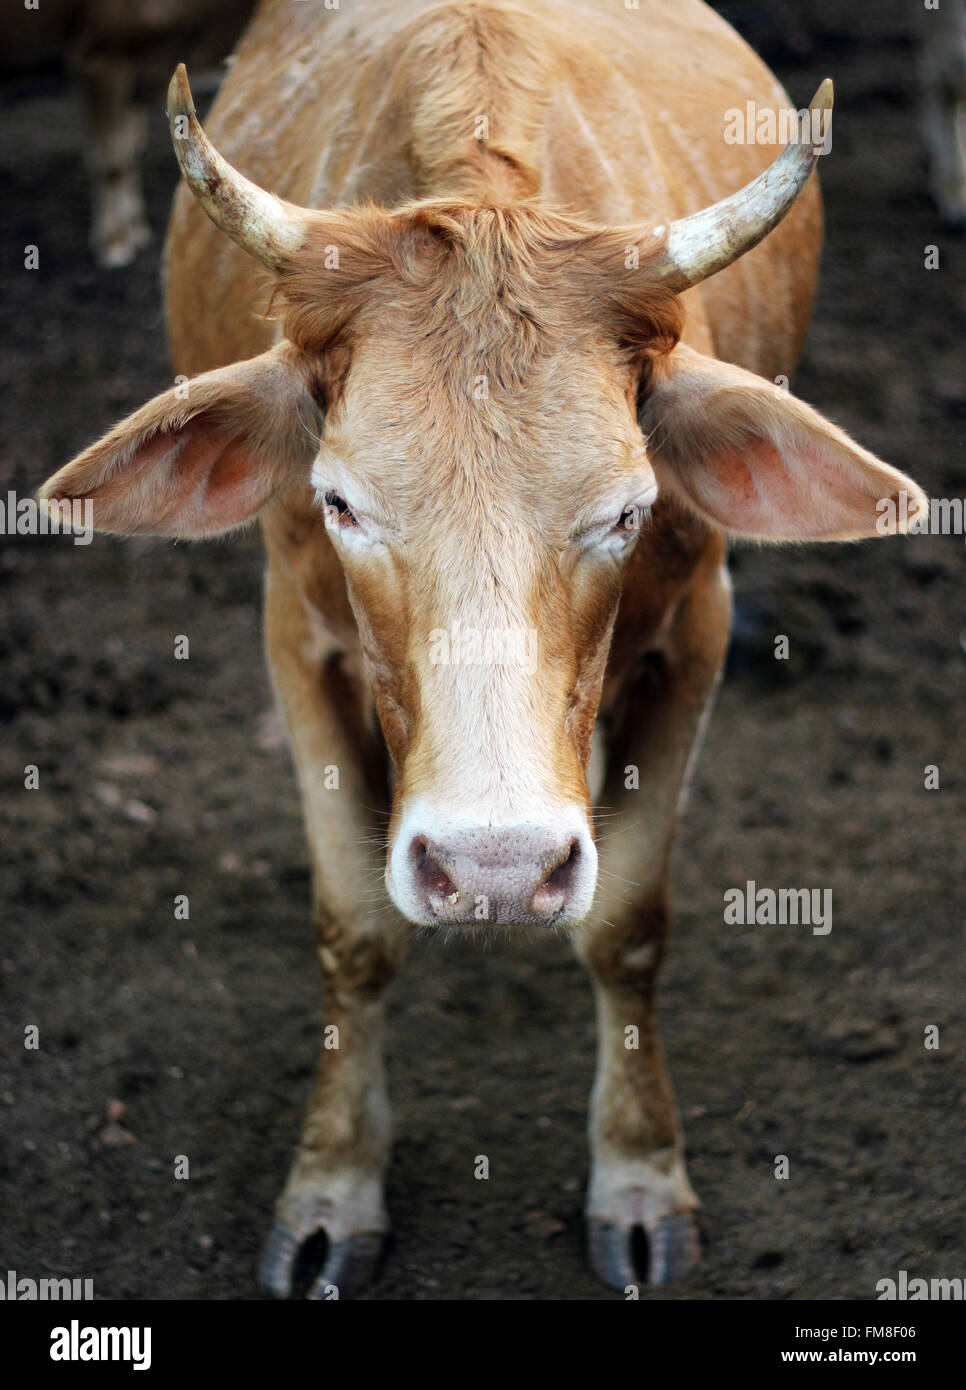 Cows staring. ox. Animals. Stock Photo